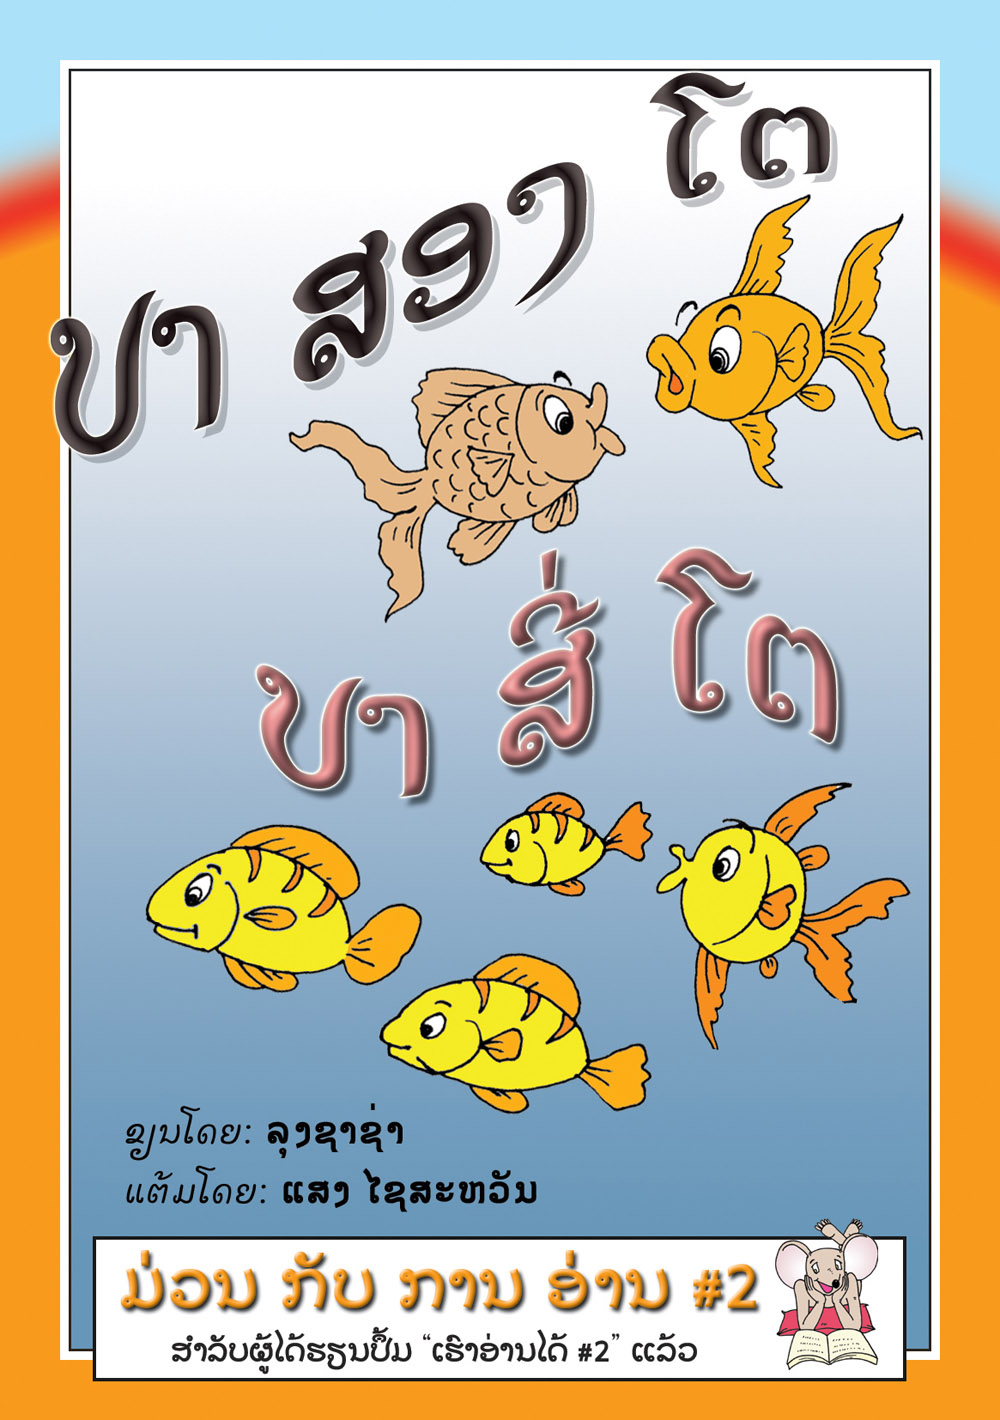 Two Fish, Four Fish large book cover, published in Lao language